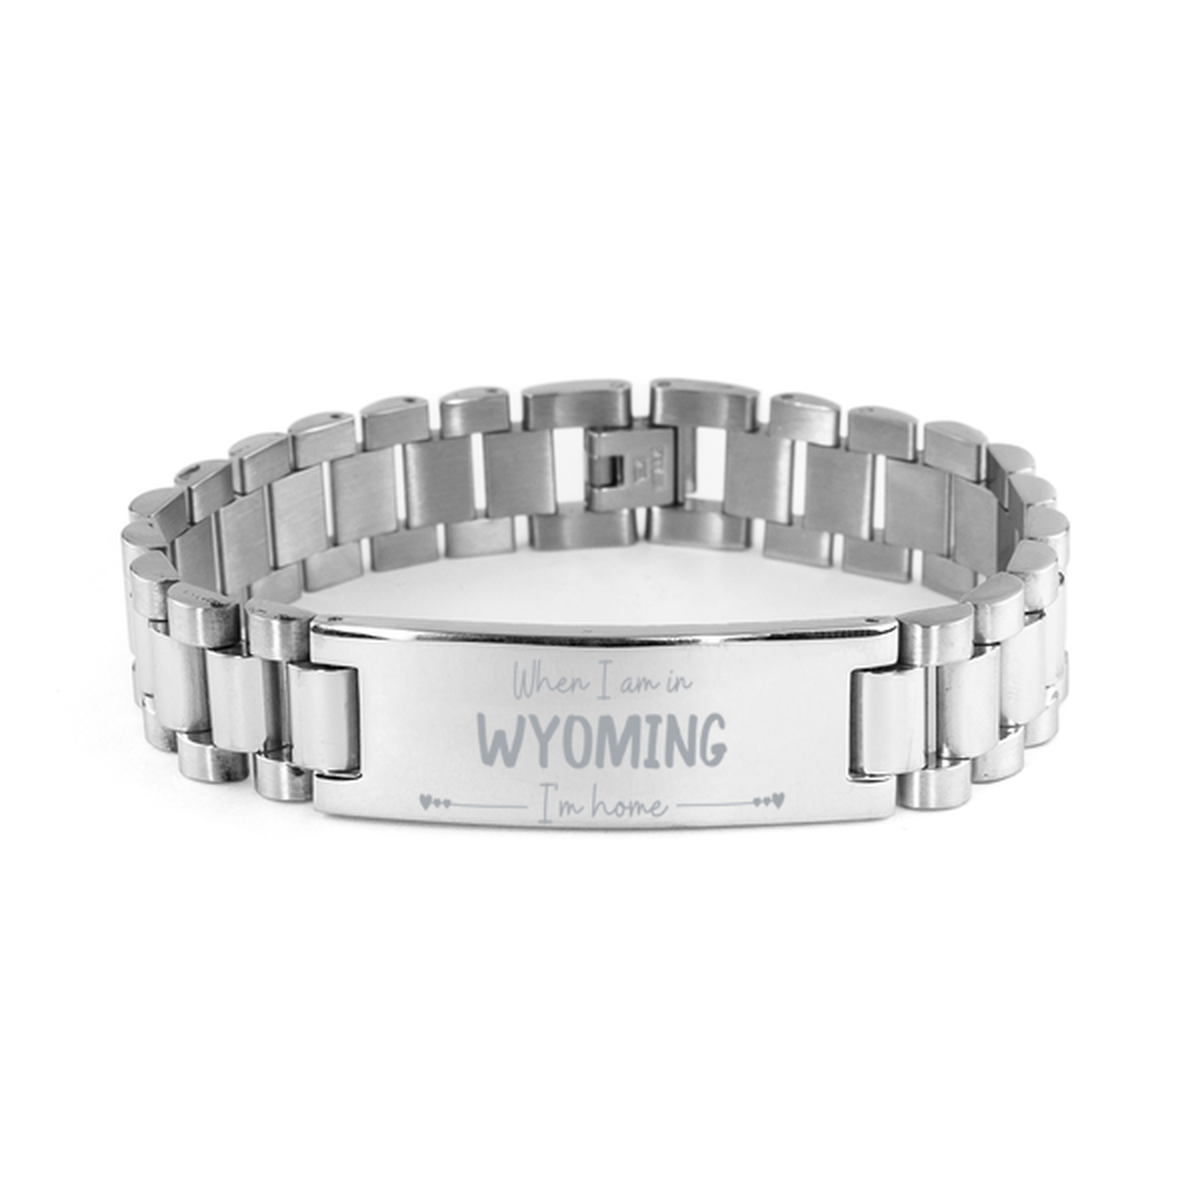 When I am in Wyoming I'm home Ladder Stainless Steel Bracelet, Cheap Gifts For Wyoming, State Wyoming Birthday Gifts for Friends Coworker